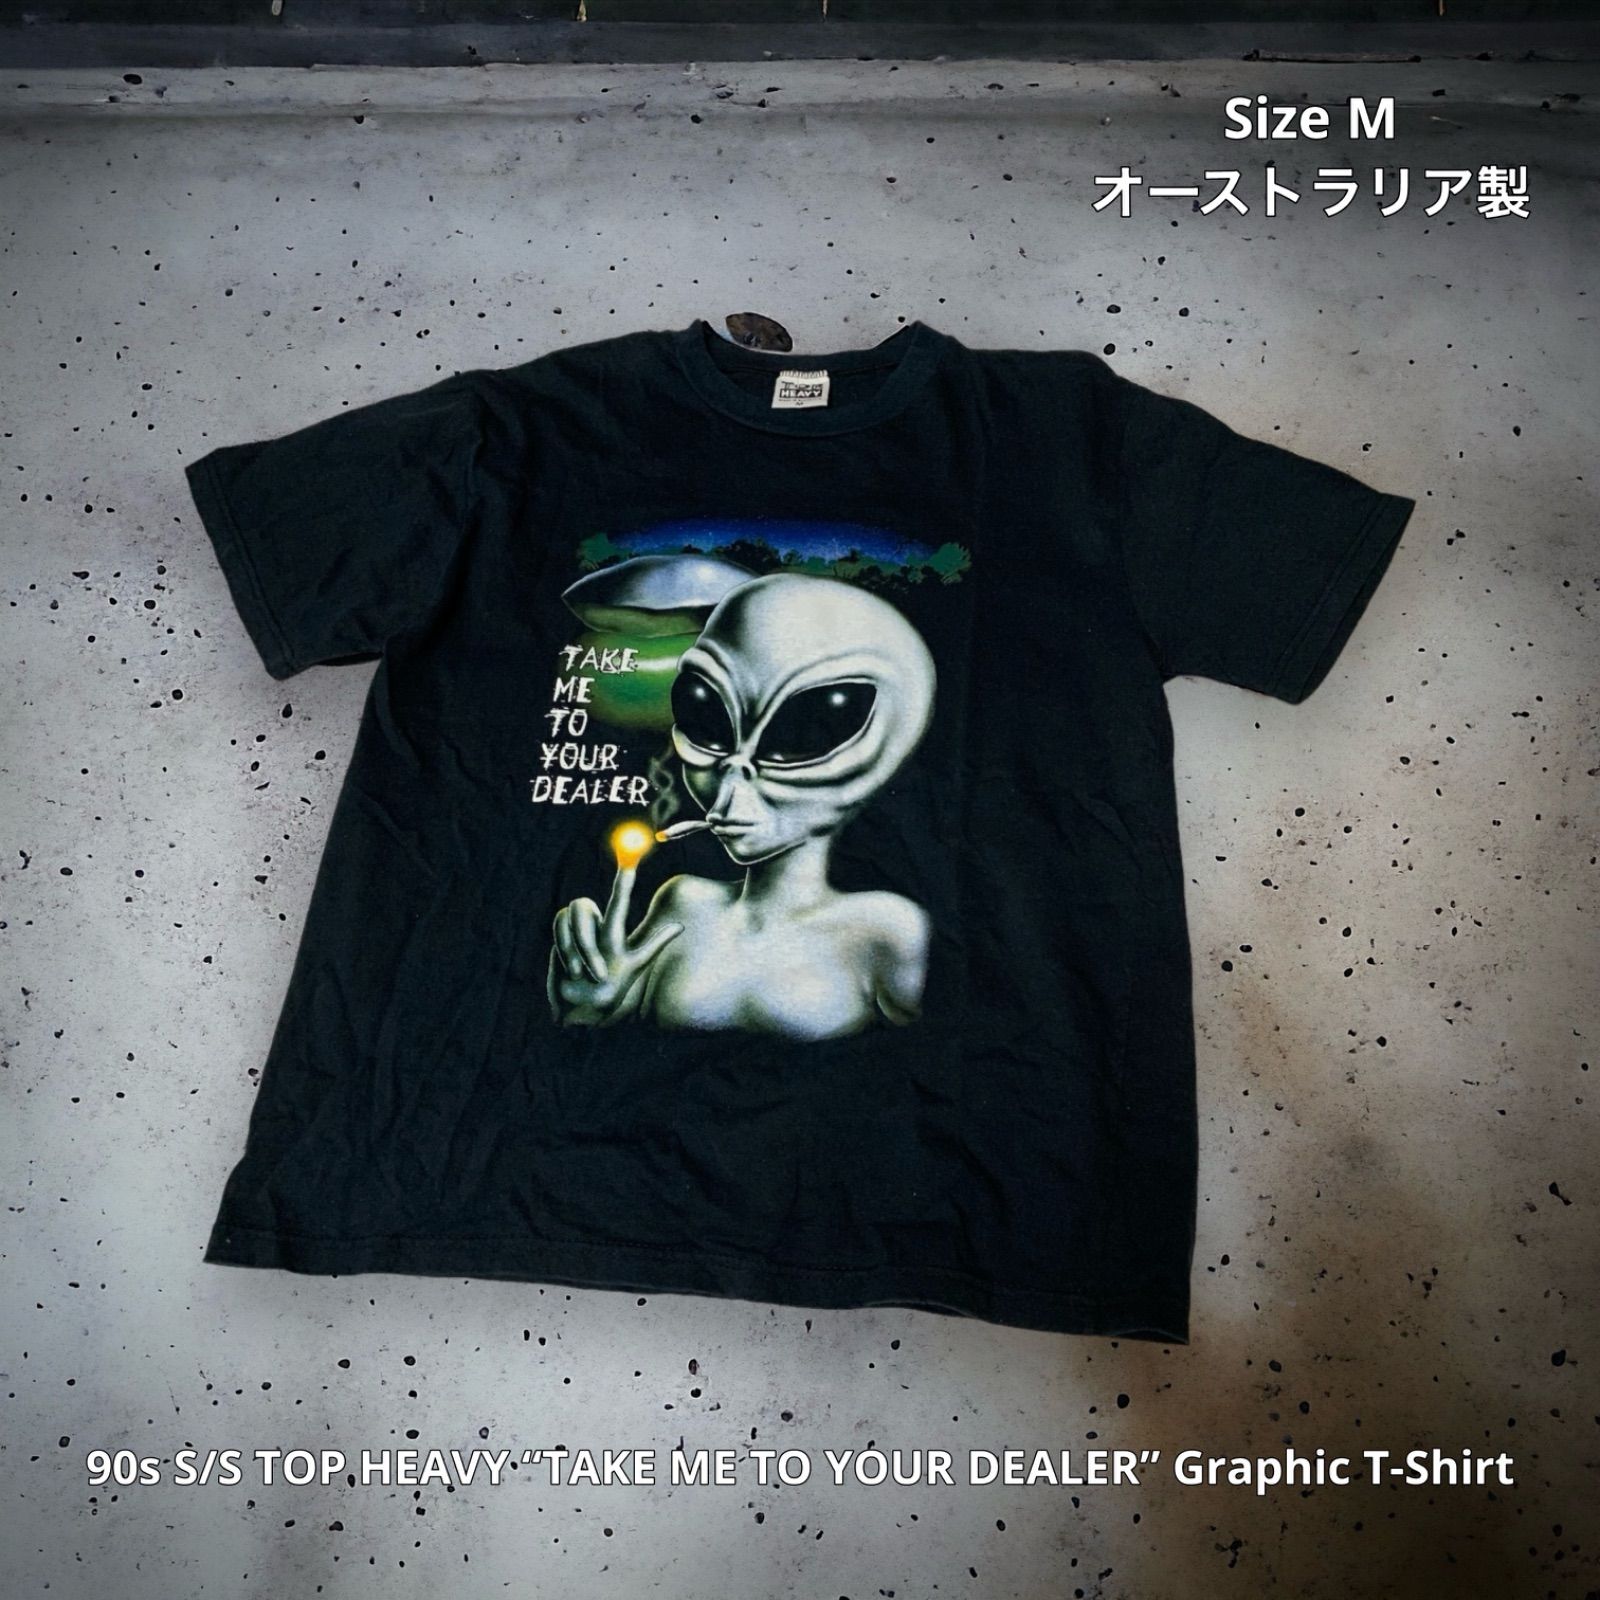 90s S/S TOP HEAVY “TAKE ME TO YOUR DEALER” Graphic T-Shirt トップ